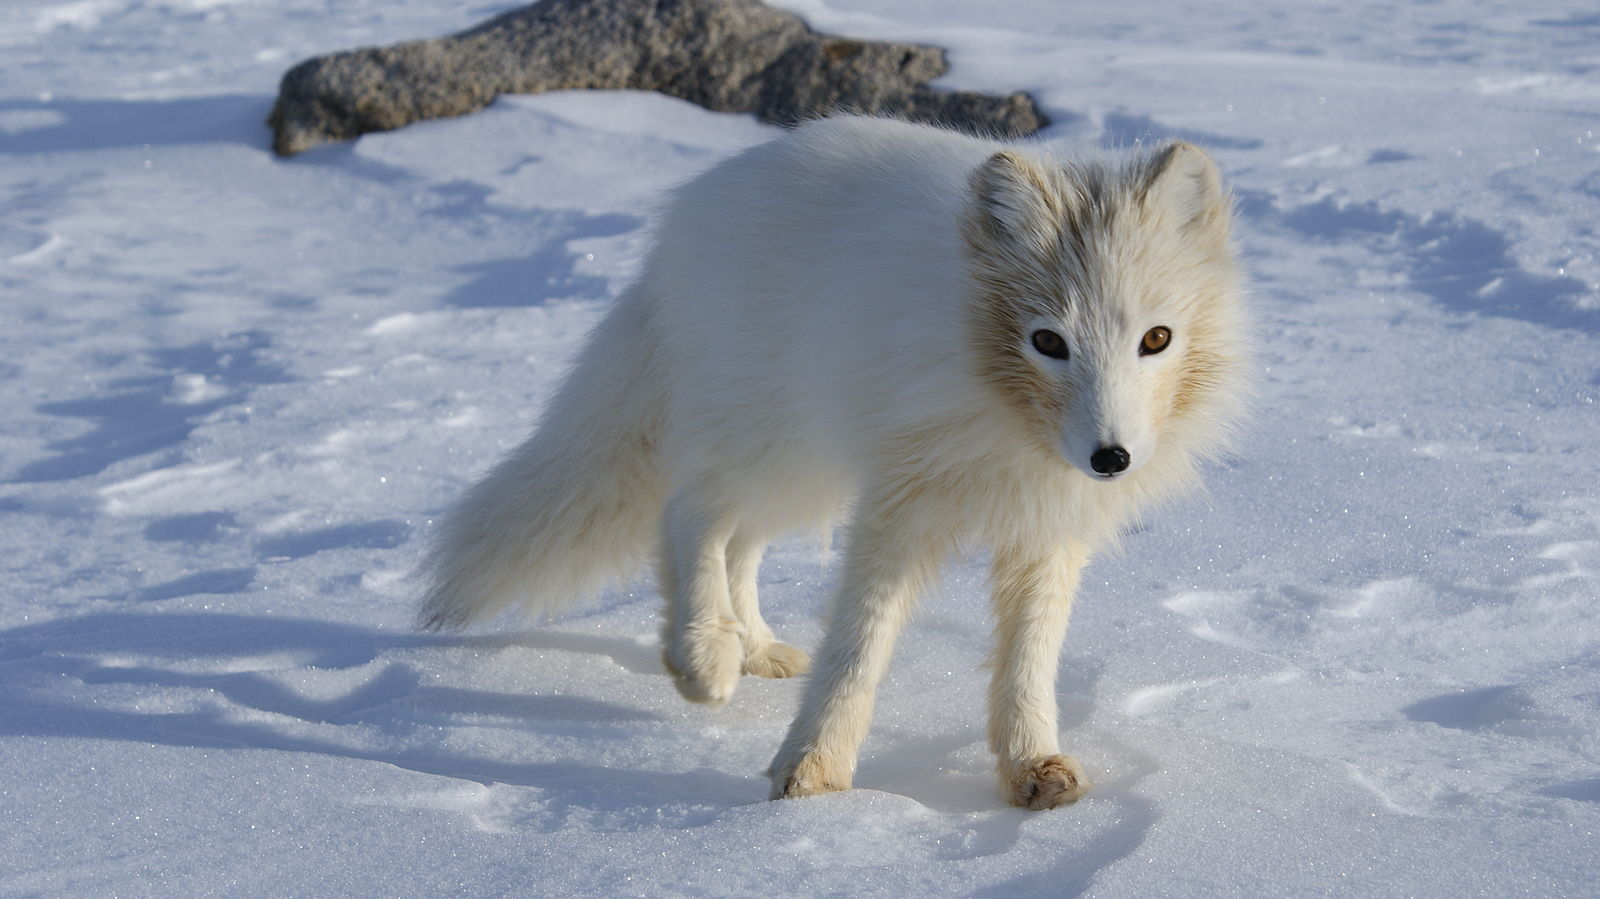 Arctic wolf in white fur standing on top of snow